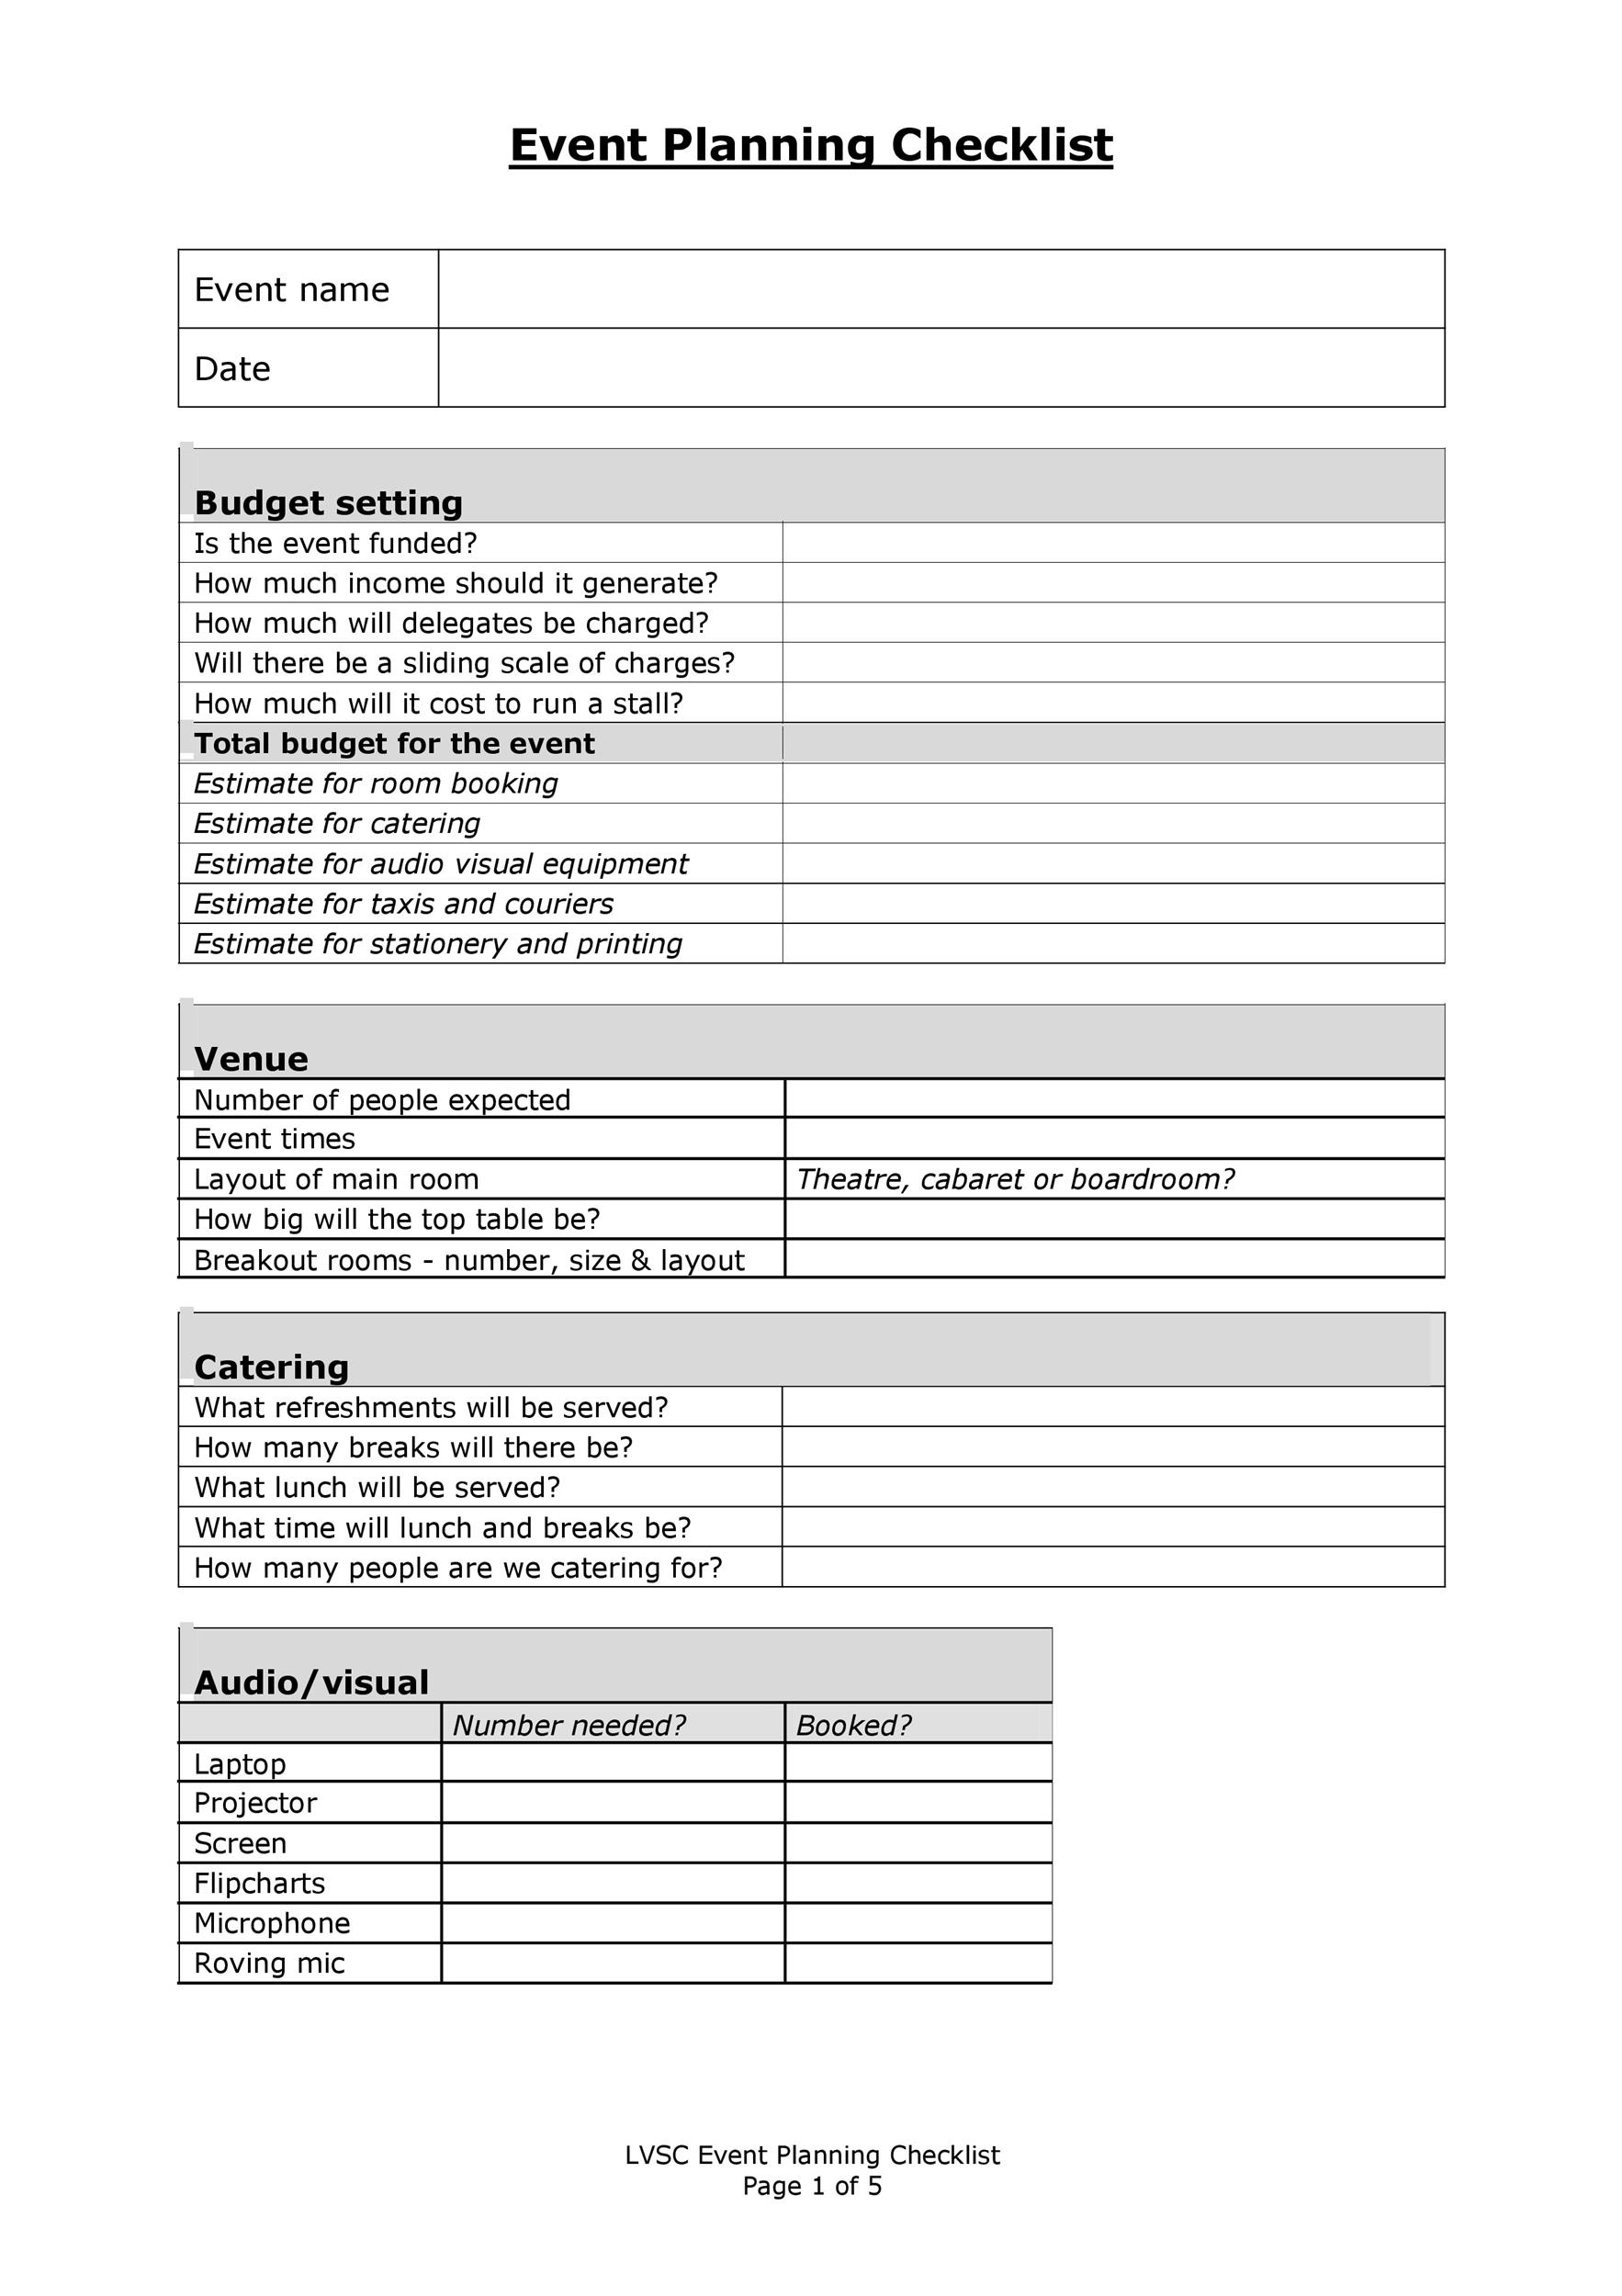 50 Professional Event Planning Checklist Templates ᐅ inside Corporate Event Planning Checklist Template